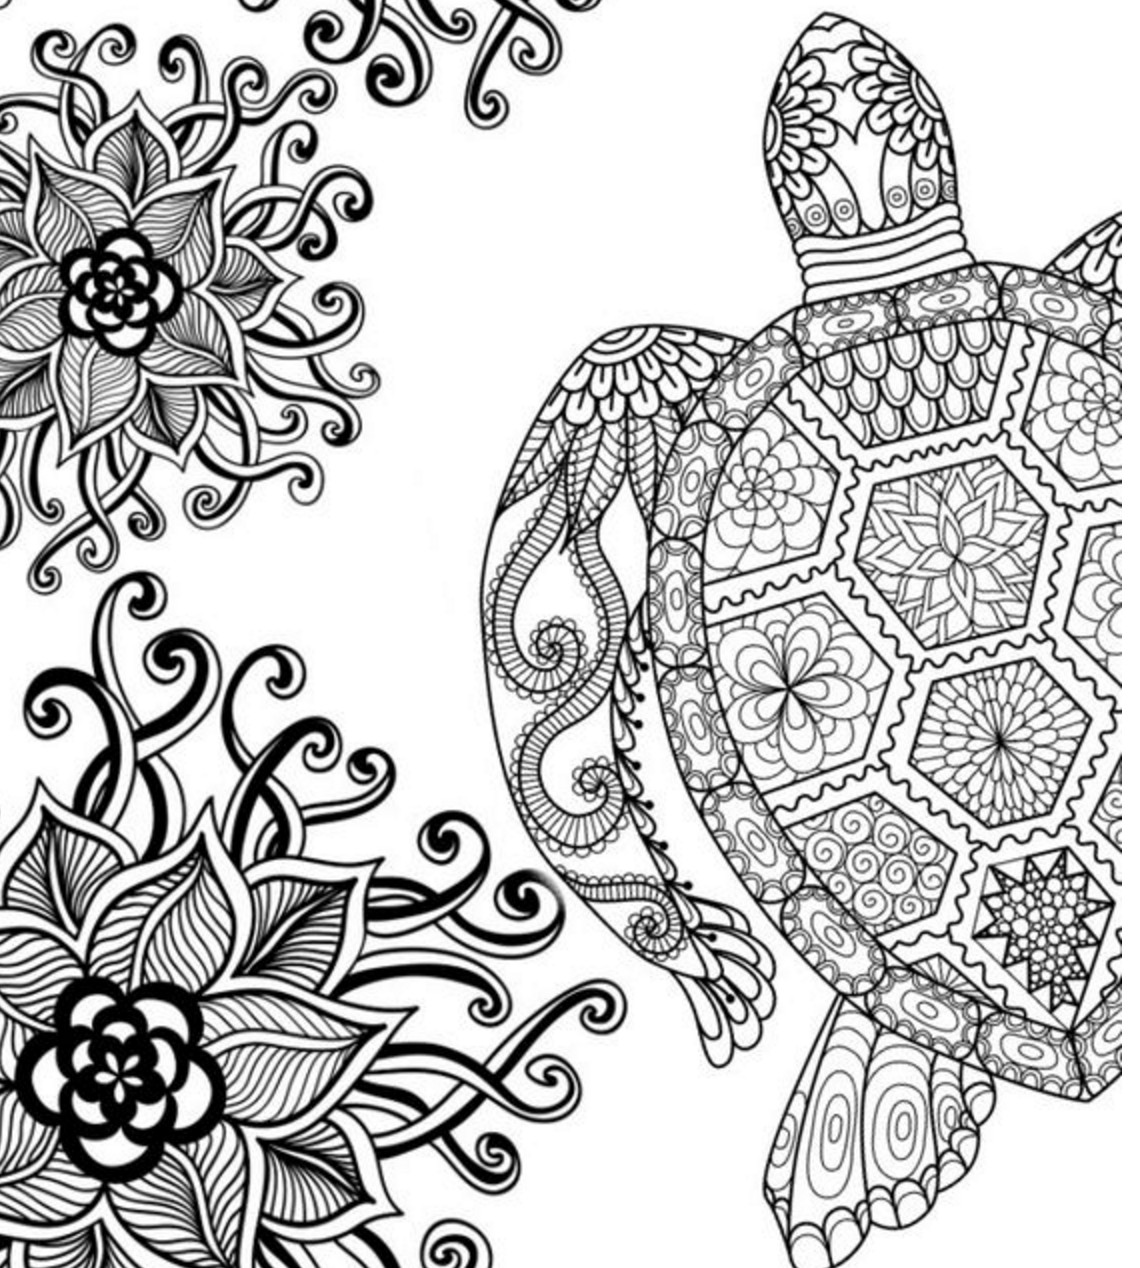 Awesome Coloring Pages For Adults
 20 Free Adult Colouring Pages The Organised Housewife